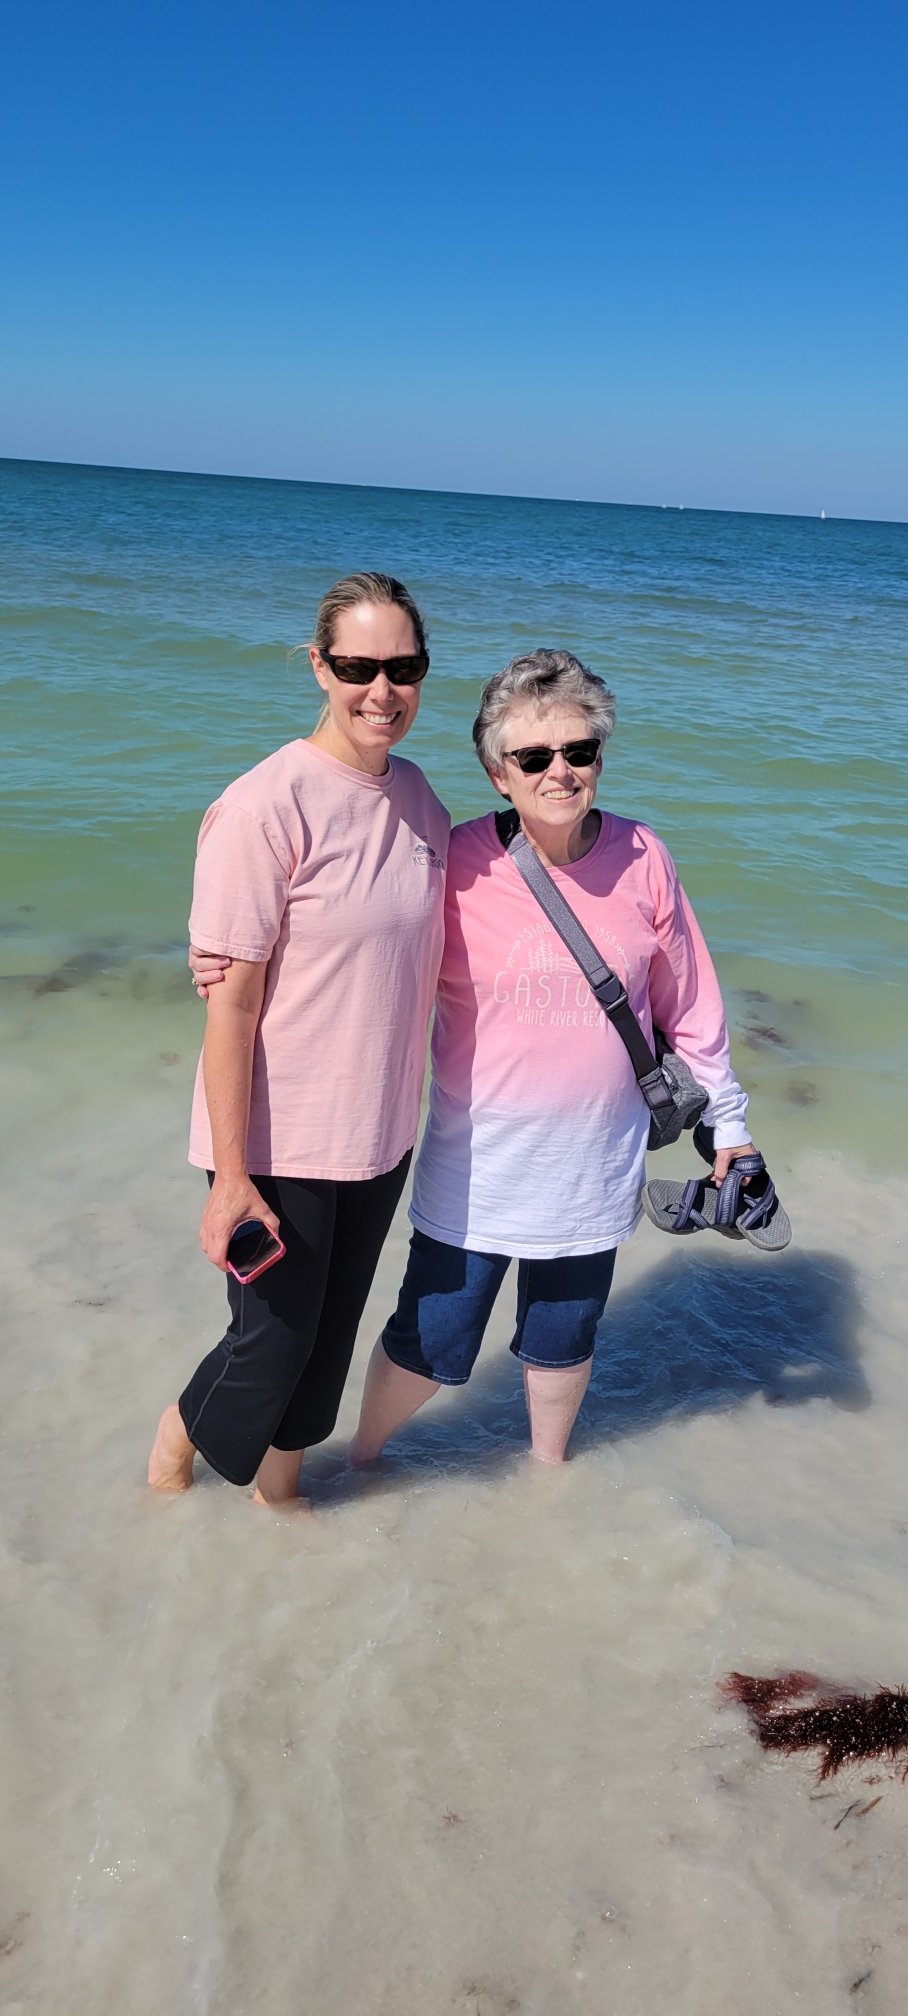 Stacy and Her Mom at Clearwater Beach.jpg